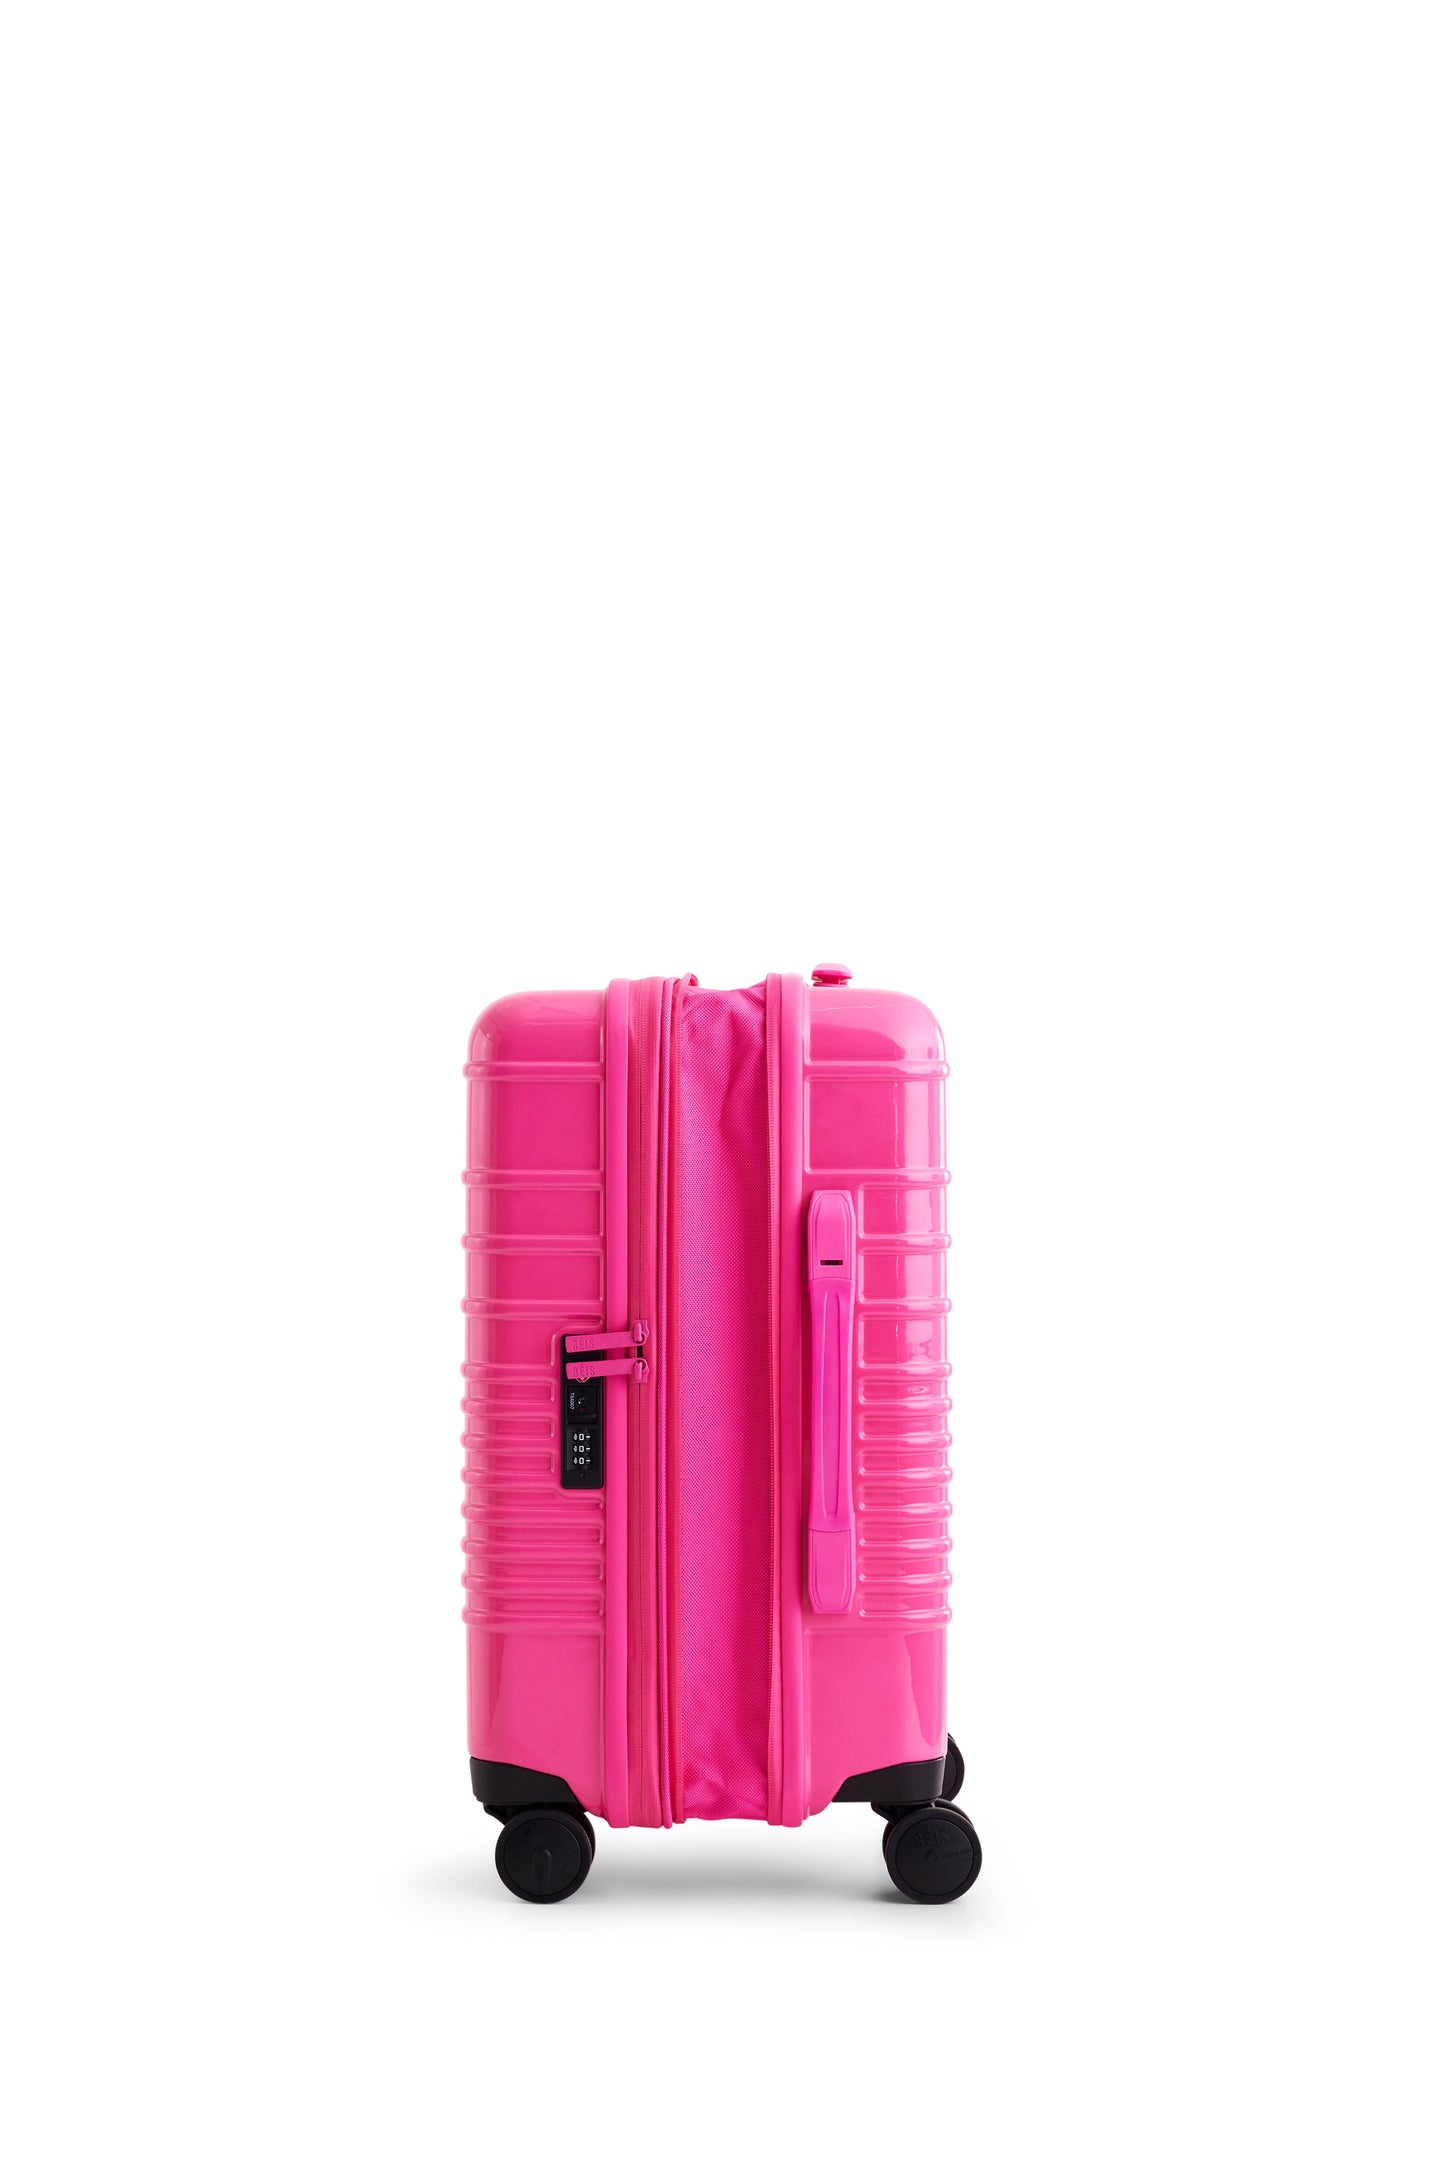 The Carry-On Roller in Barbie™ Pink